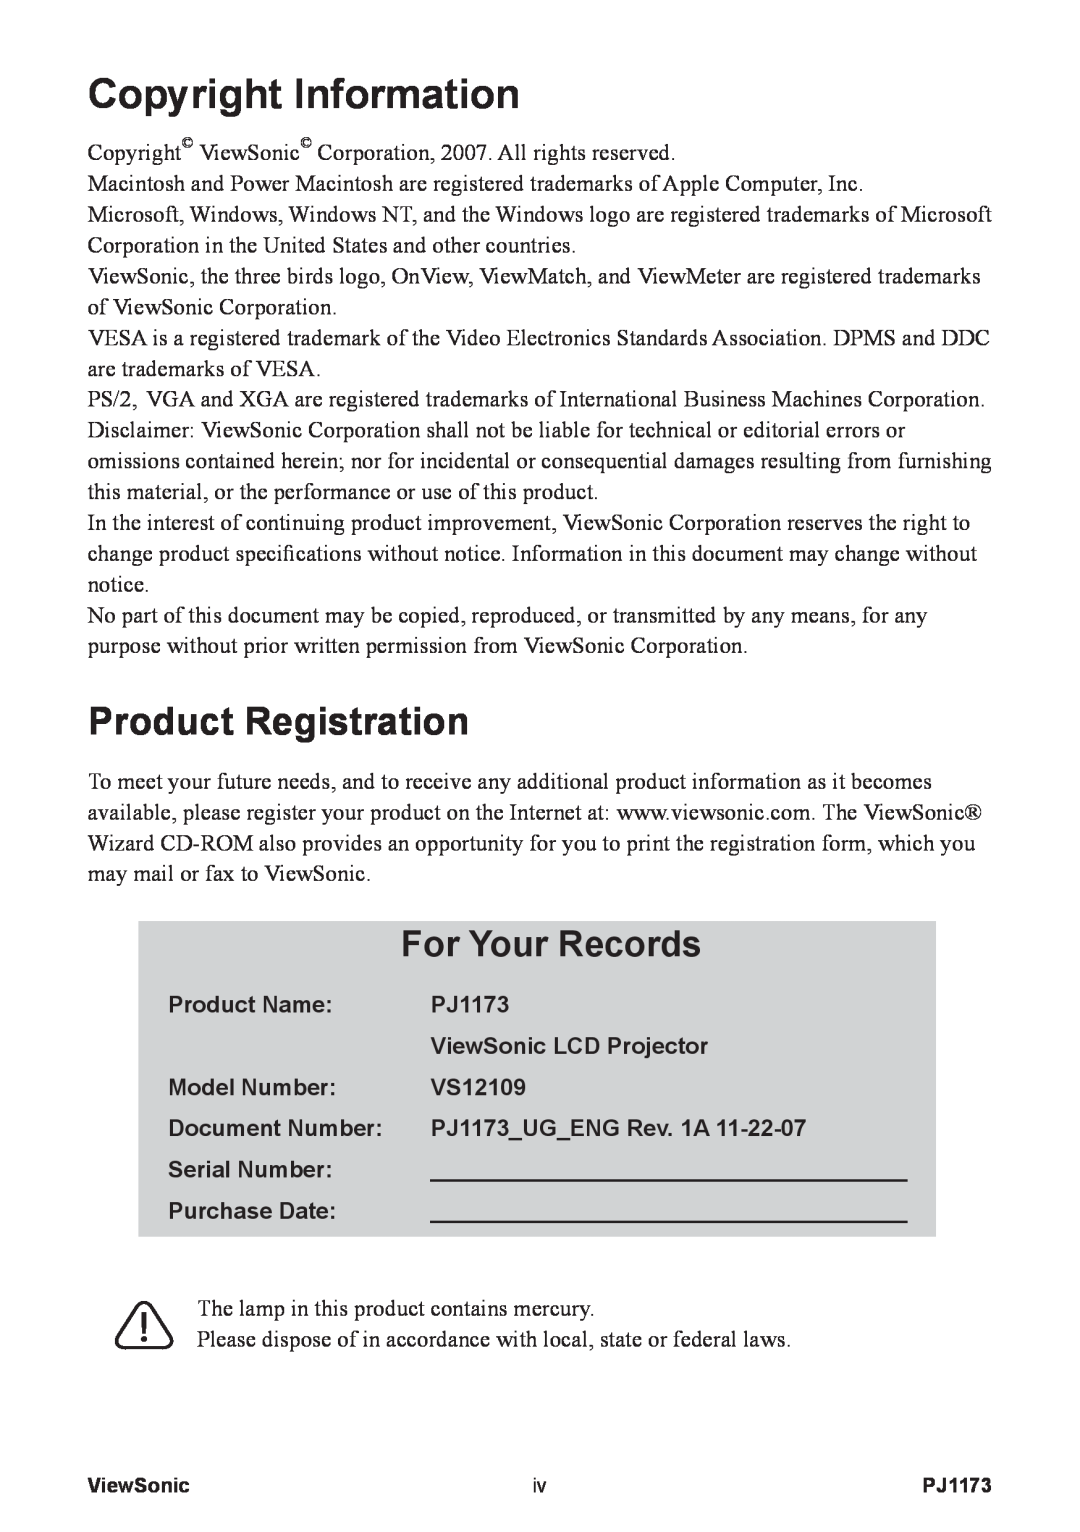 ViewSonic PJ1173, VS12109 warranty Product Registration, For Your Records, Copyright Information 